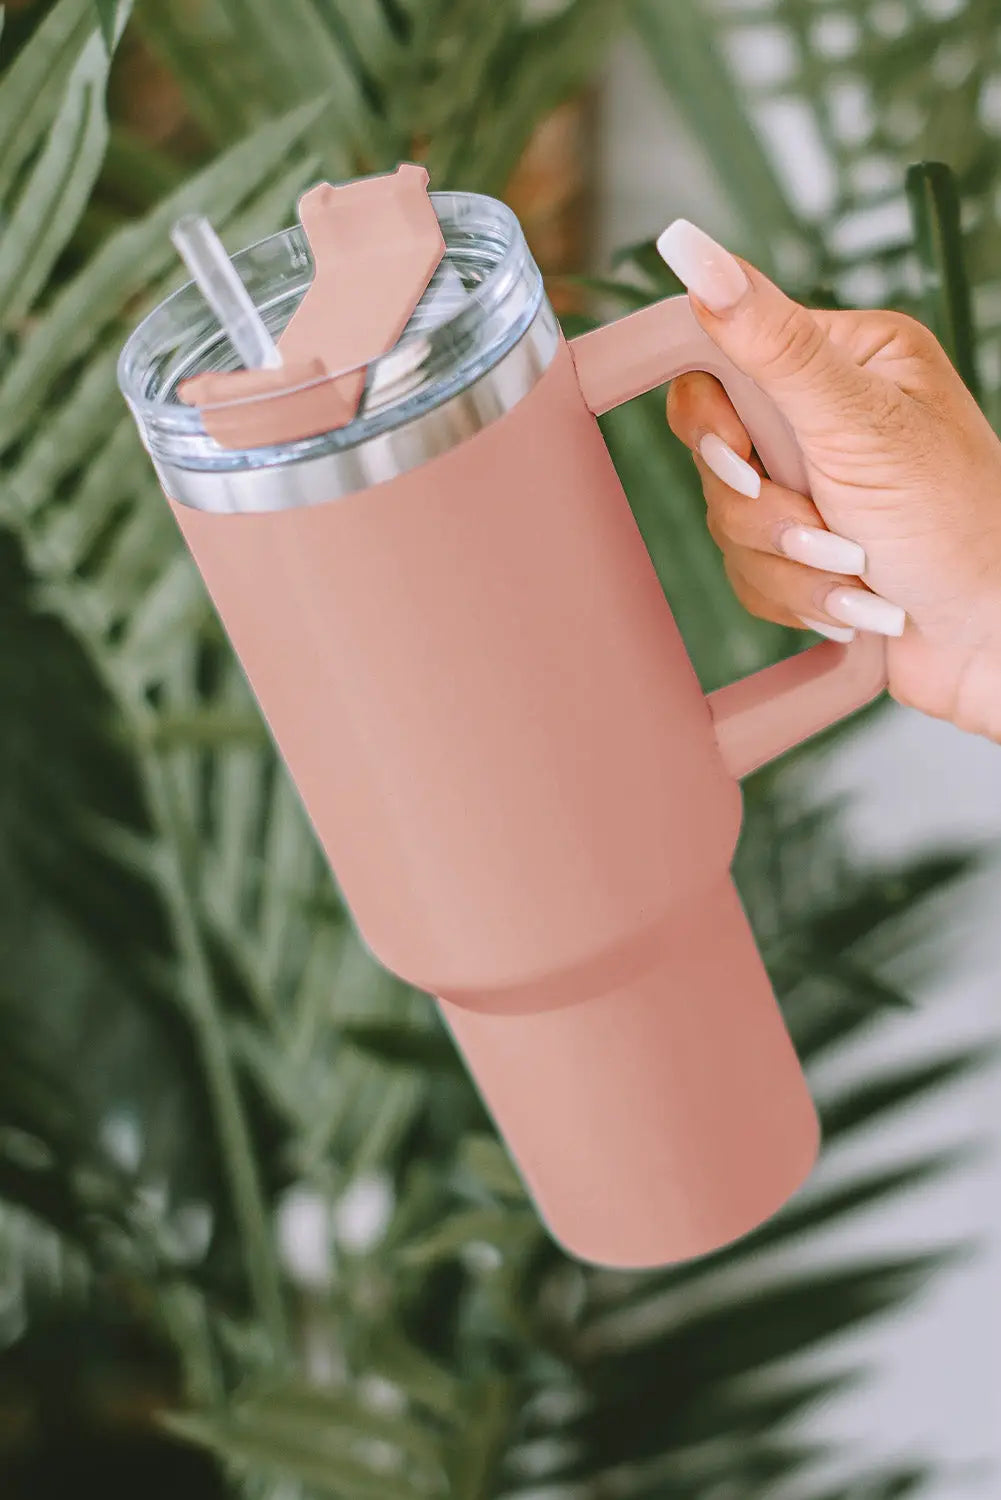 Pink 304 stainless steel double insulated cup - one size / stainless steel - tumblers